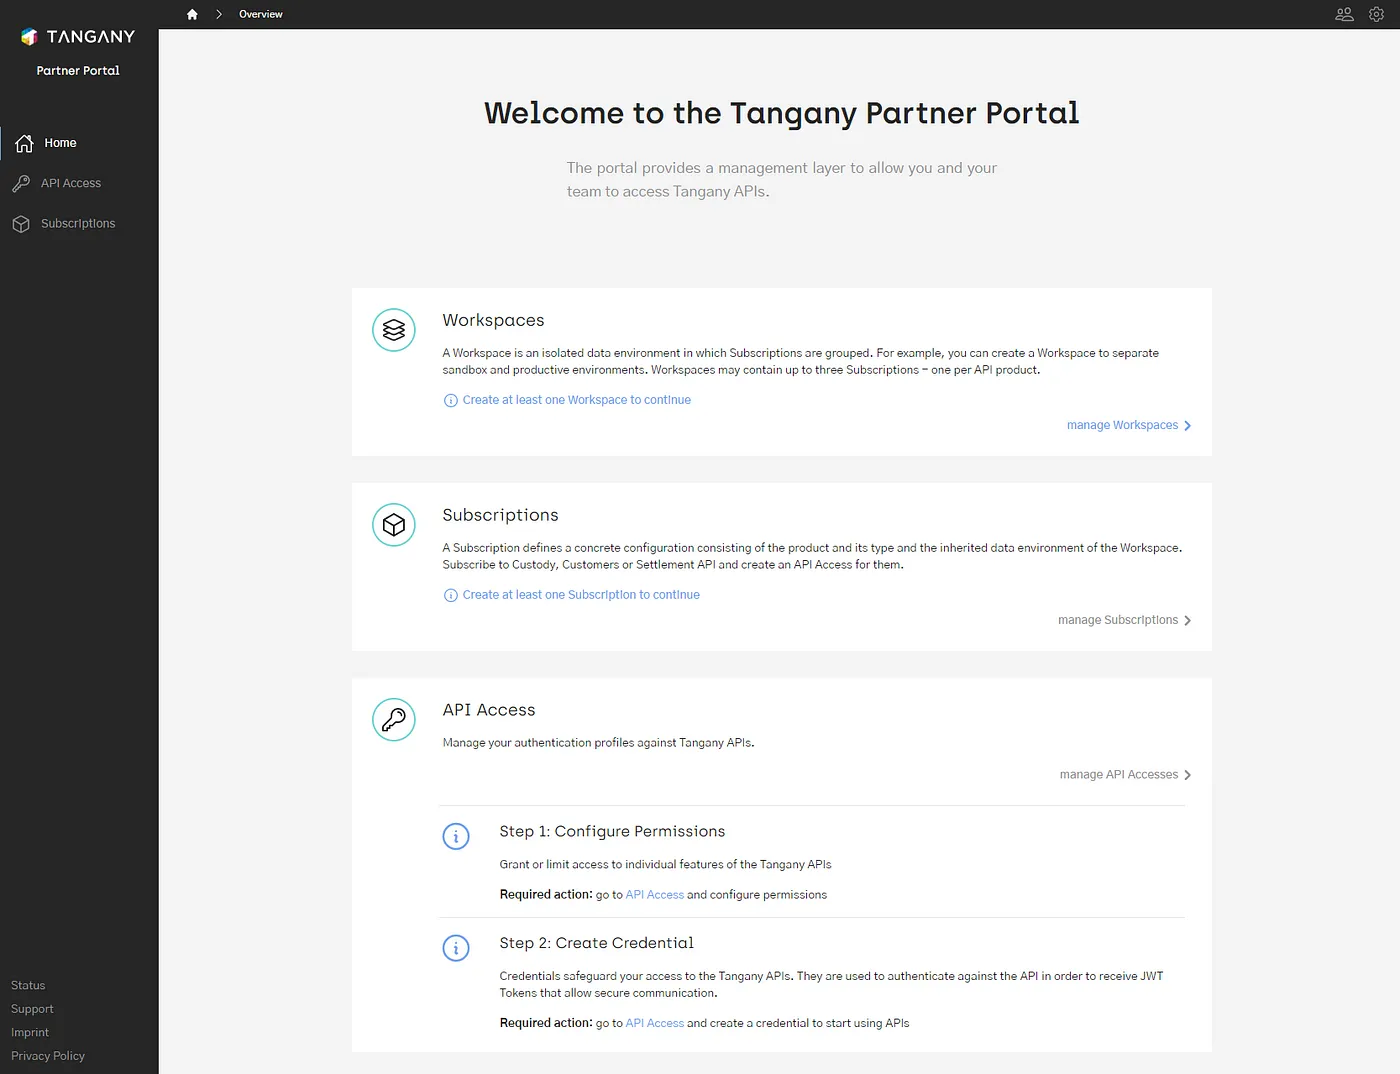 Picture of the UI of the Tangany Partner Portal